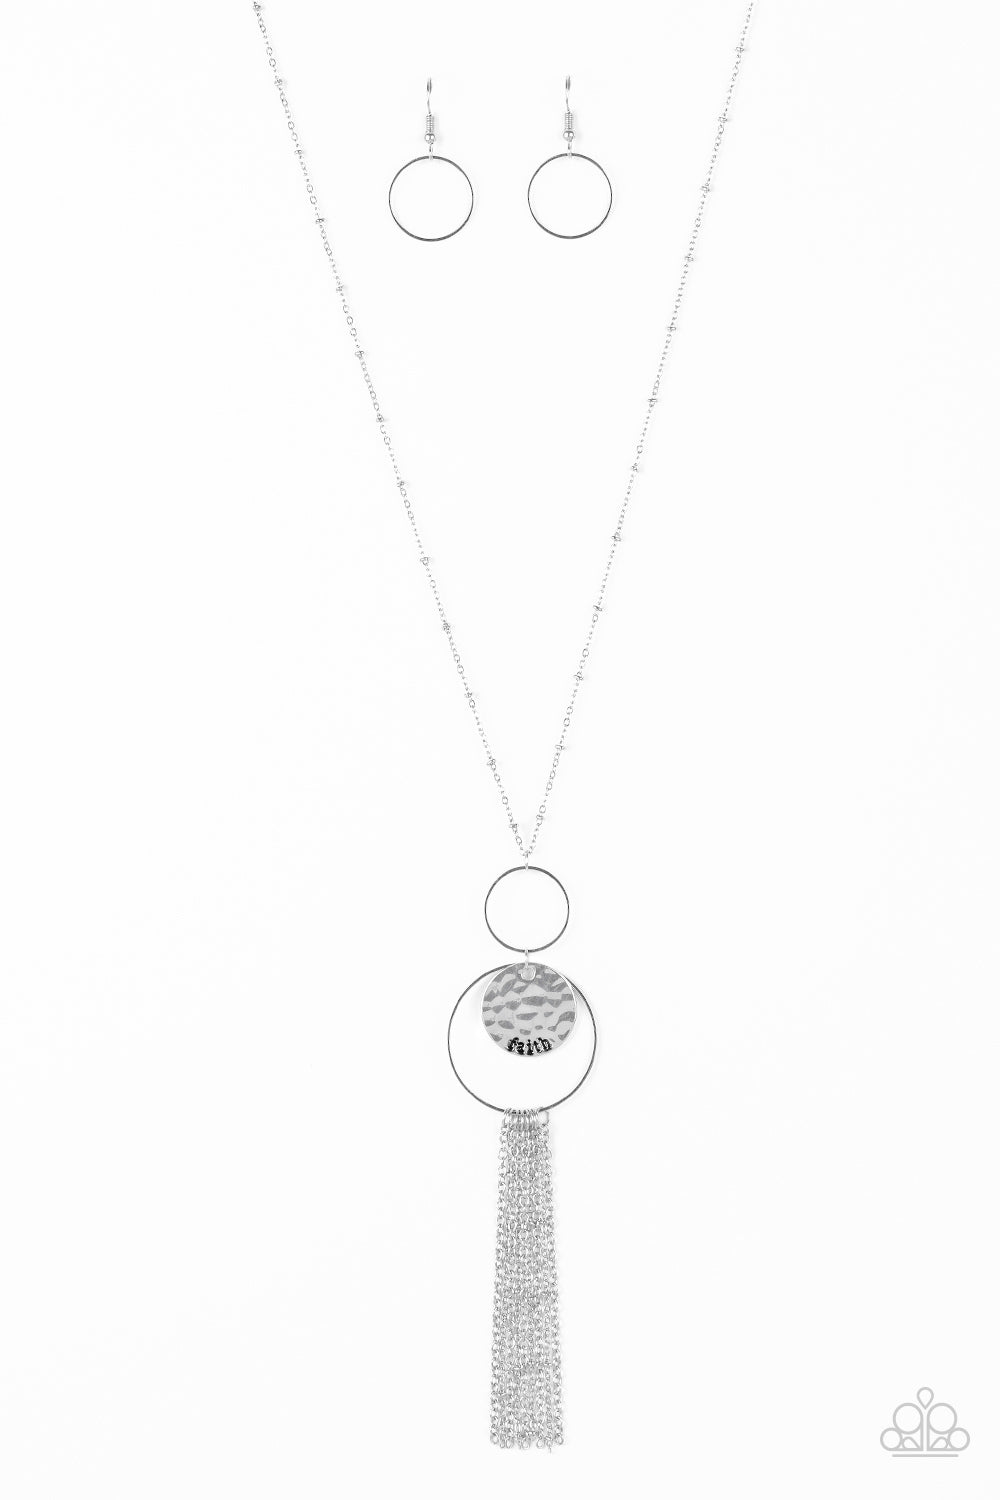 Faith Makes All Things Possible Necklace - Silver